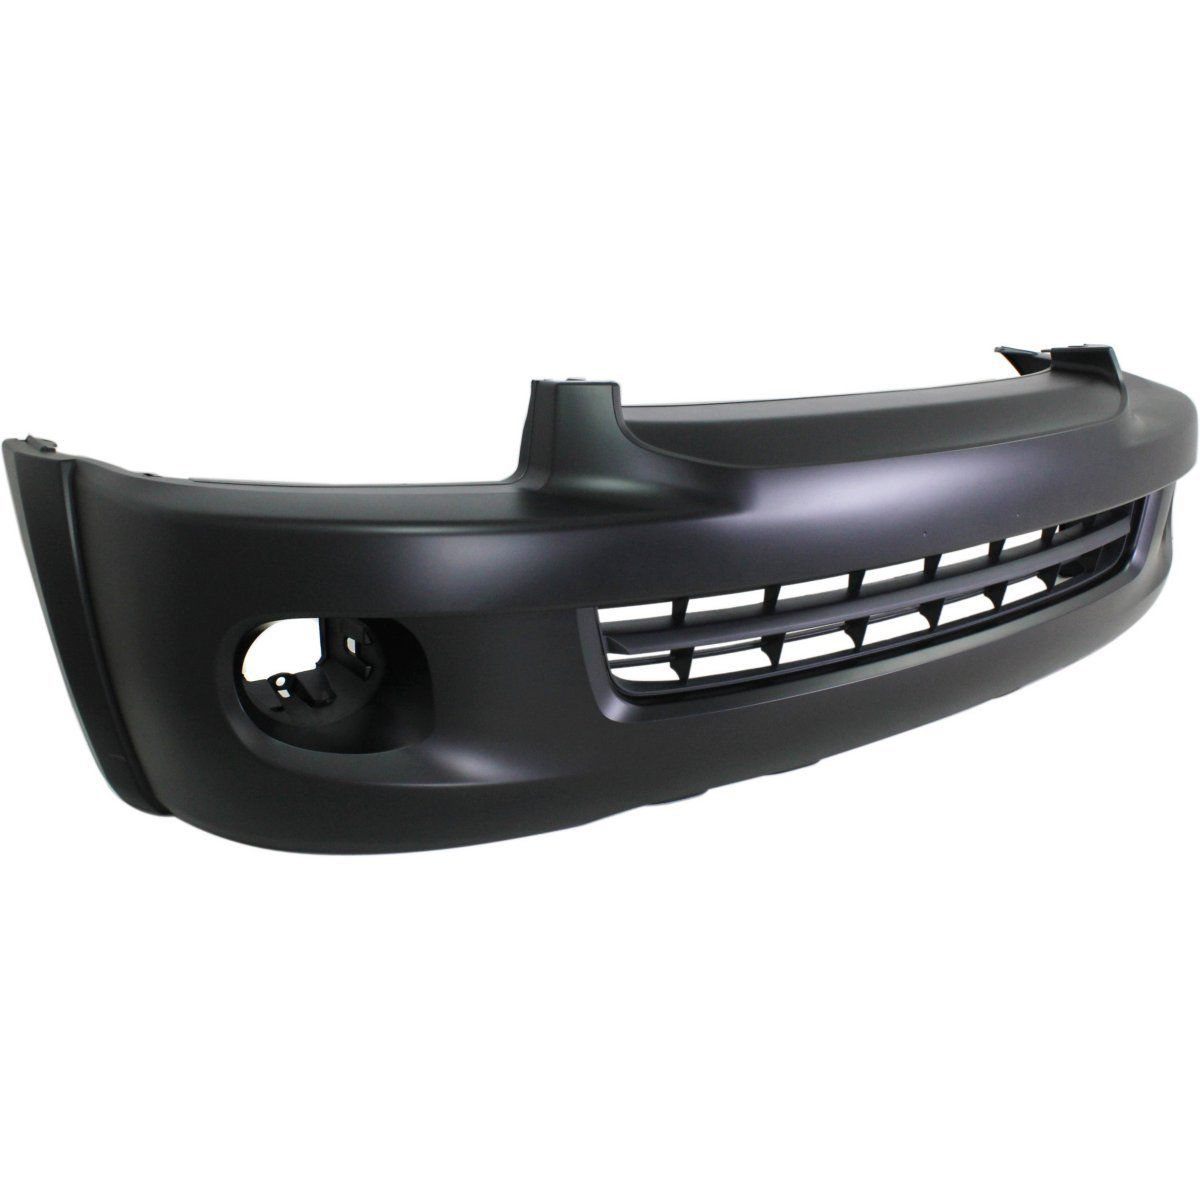 2005-2007 TOYOTA SEQUOIA Front Bumper Cover Painted to Match